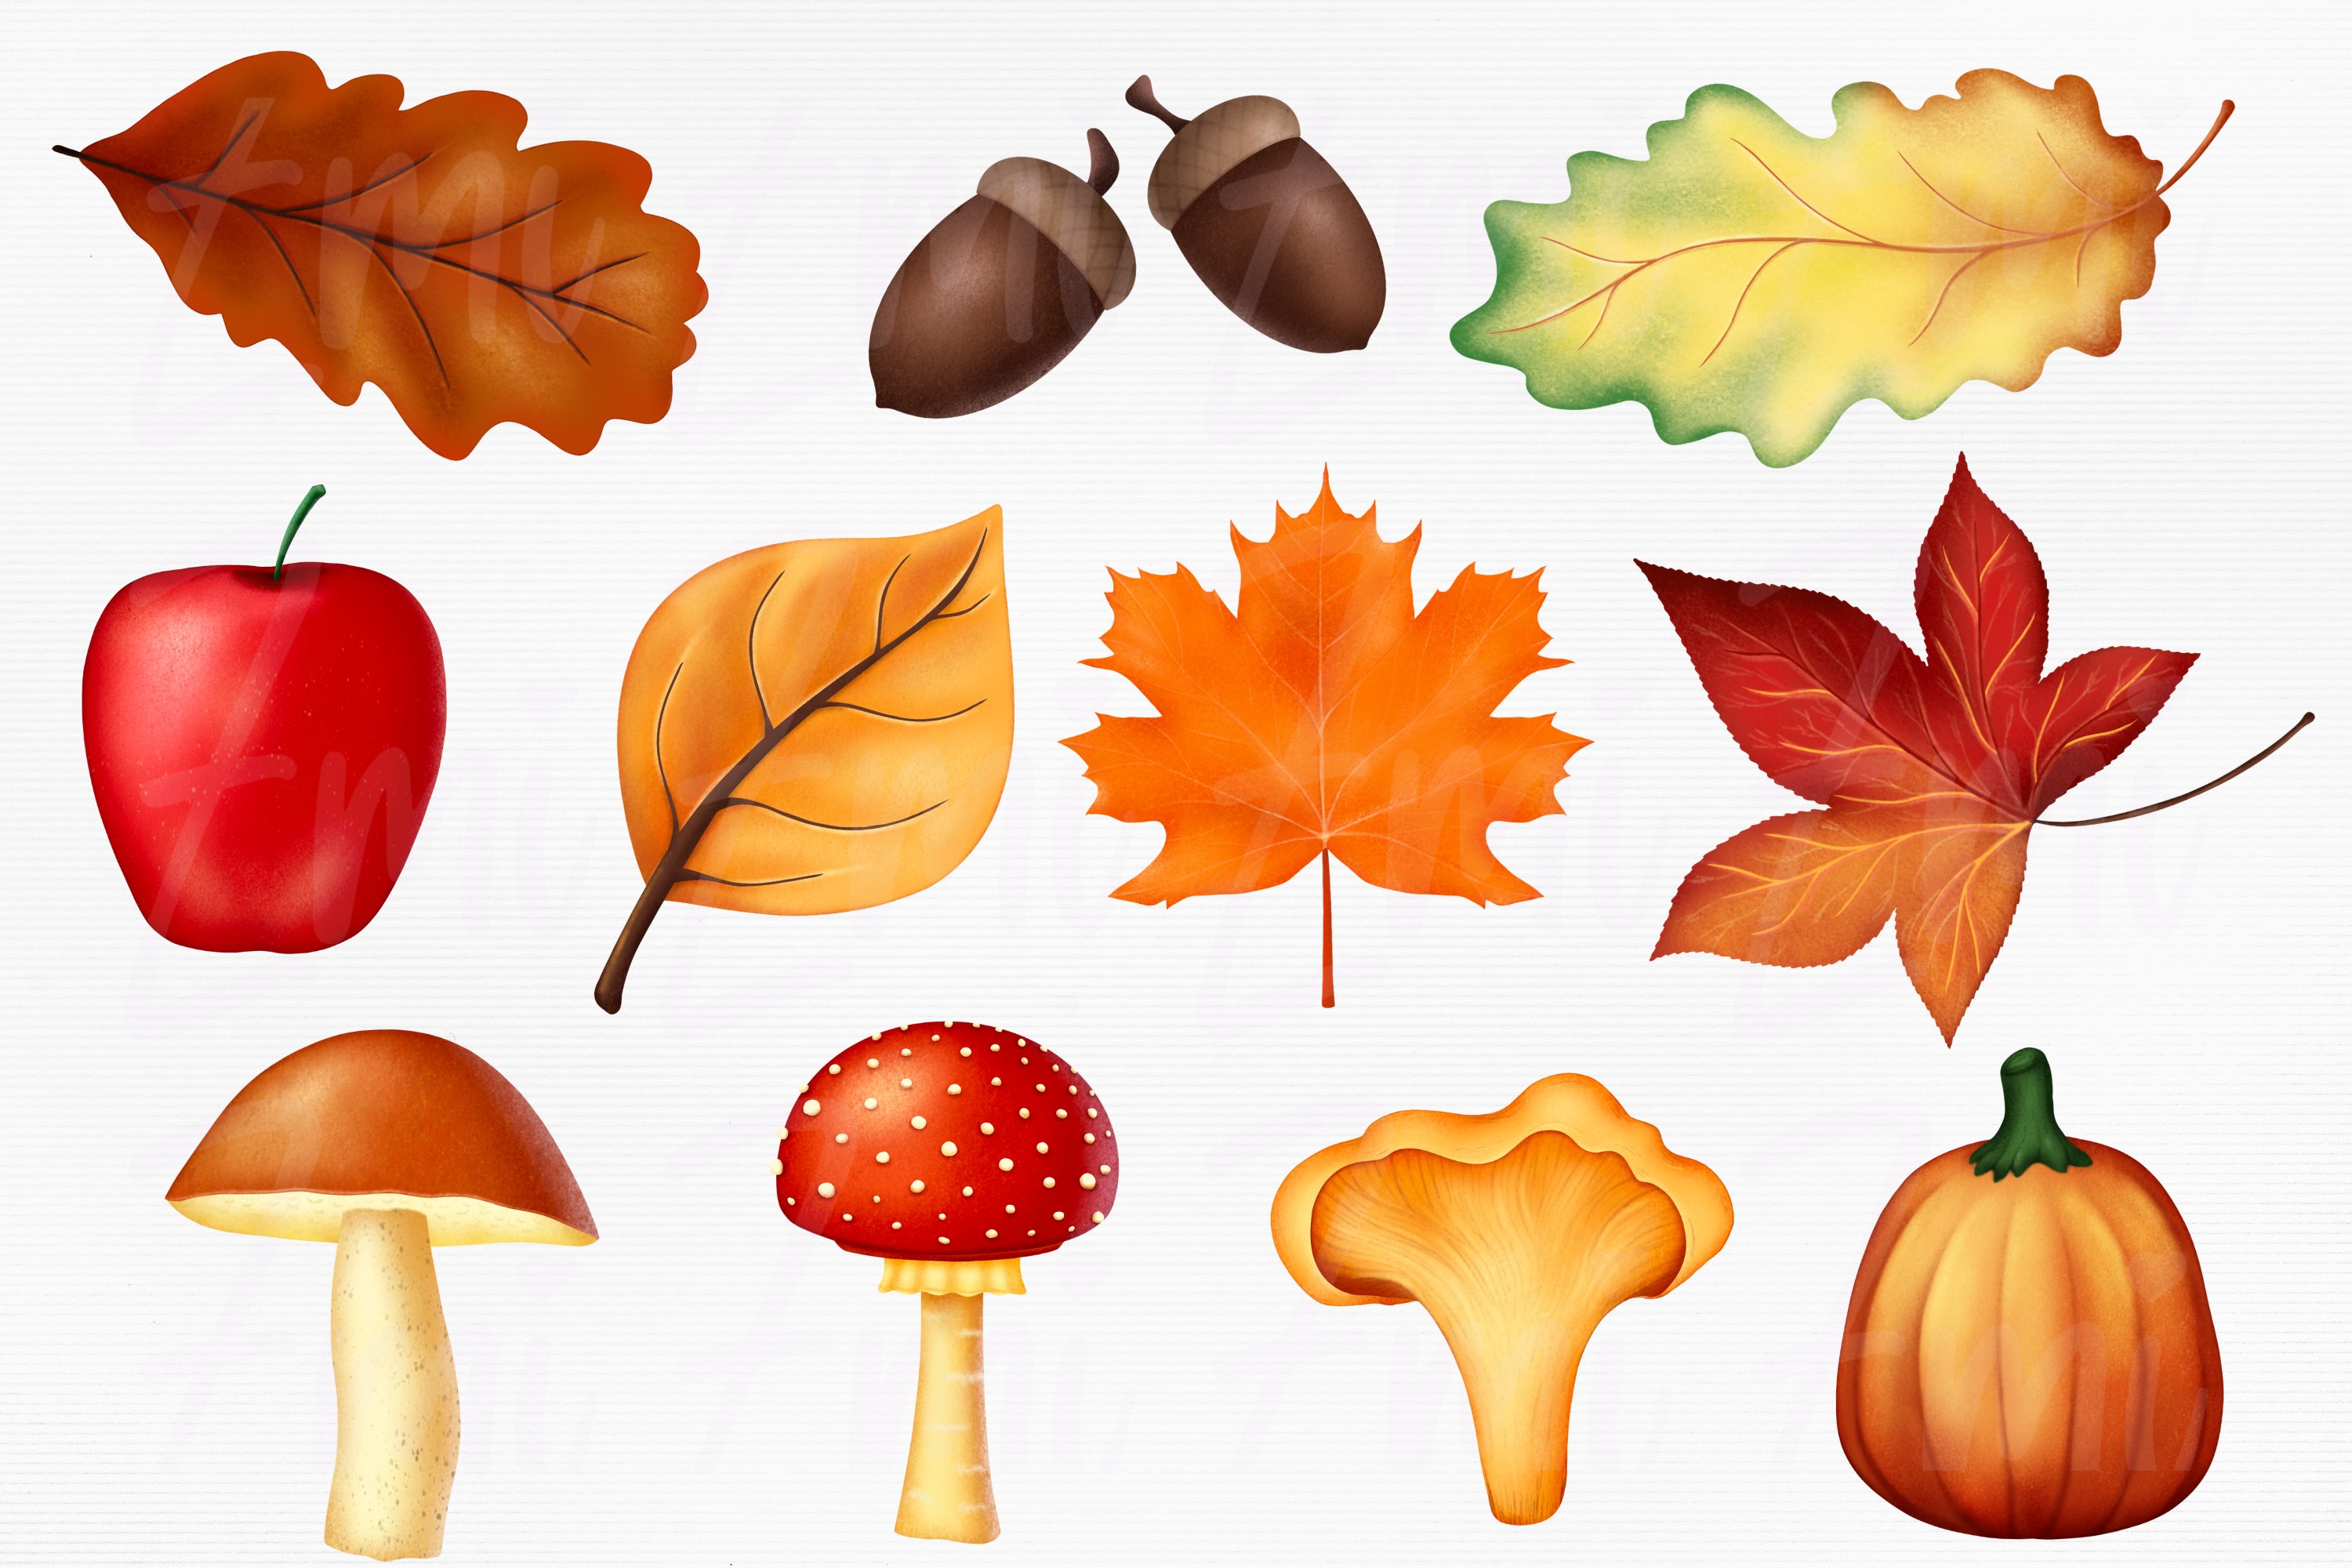 Colorful set of different illustrations of fall leaves and mushrooms on a gray background.